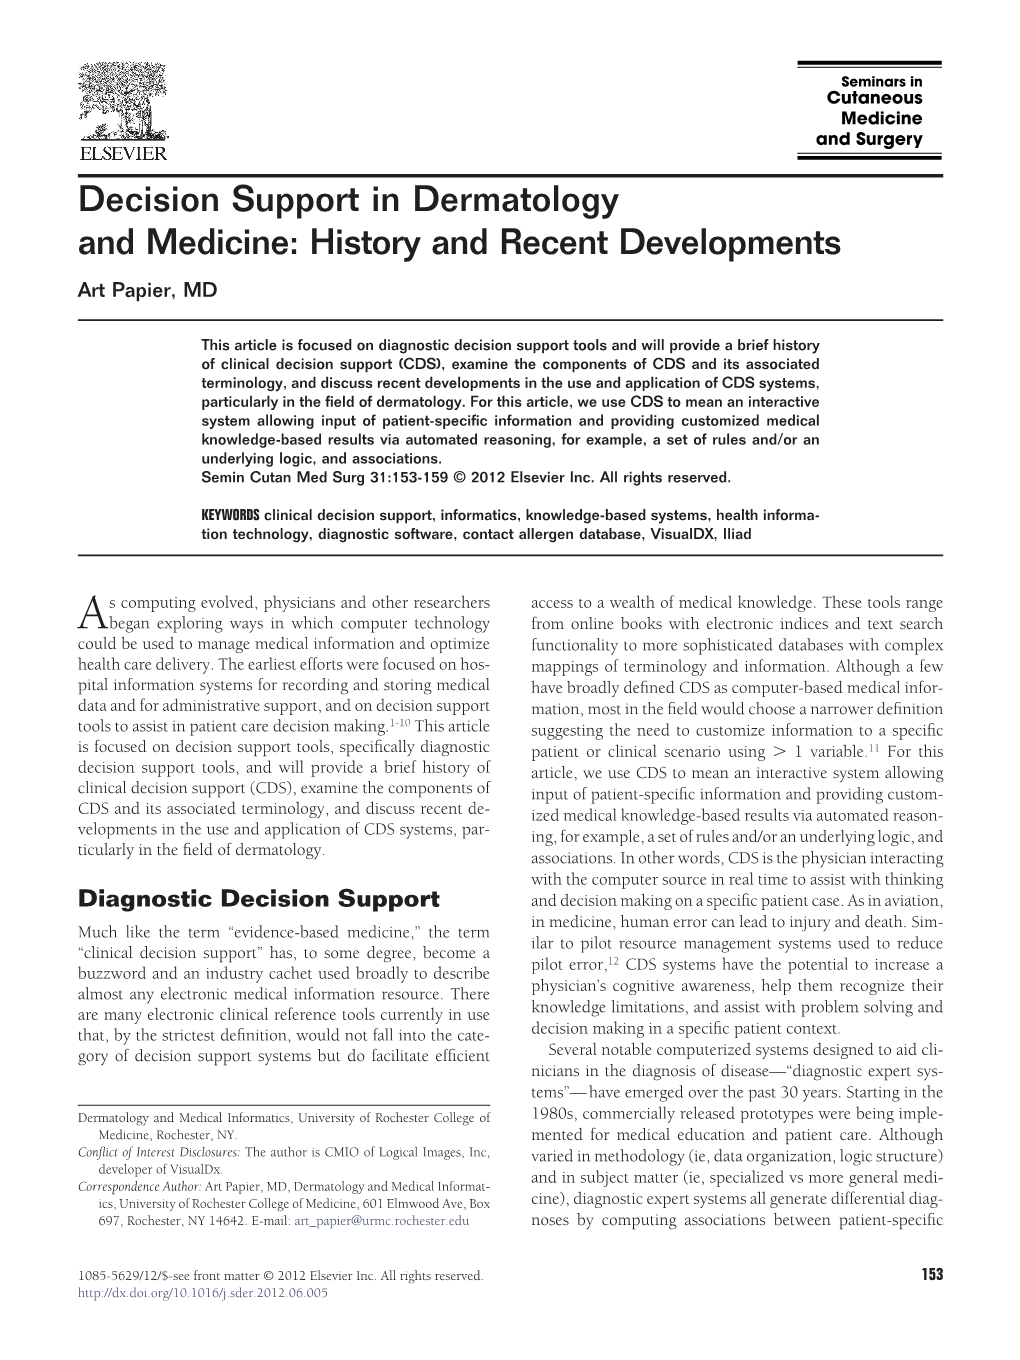 Decision Support in Dermatology and Medicine: History and Recent Developments Art Papier, MD